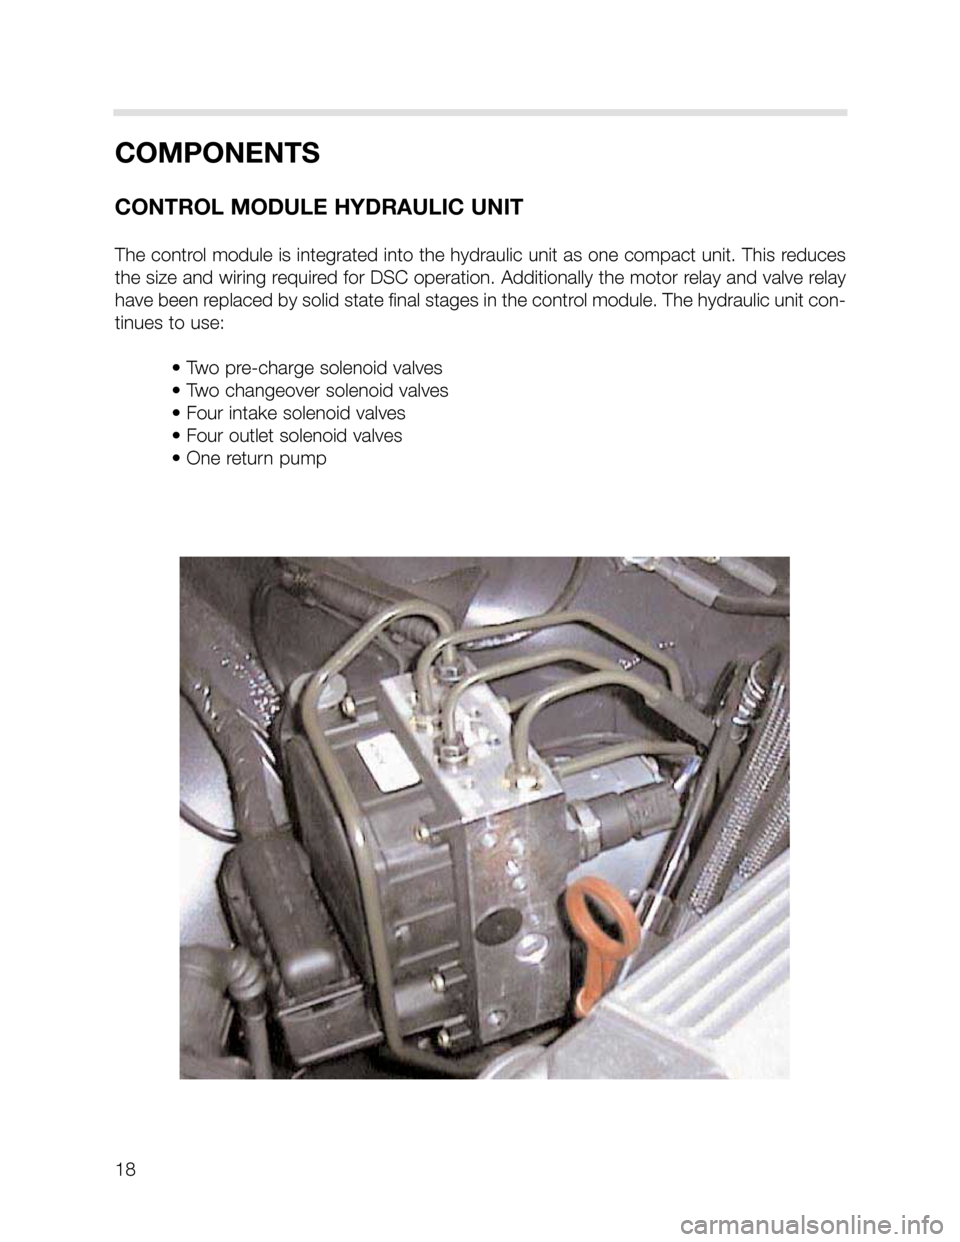 BMW X5 2005 E53 DSC System User Guide 18
COMPONENTS
CONTROL MODULE HYDRAULIC UNIT
The control module is integrated into the hydraulic unit as one compact unit. This reduces
the size and wiring required for DSC operation. Additionally the 